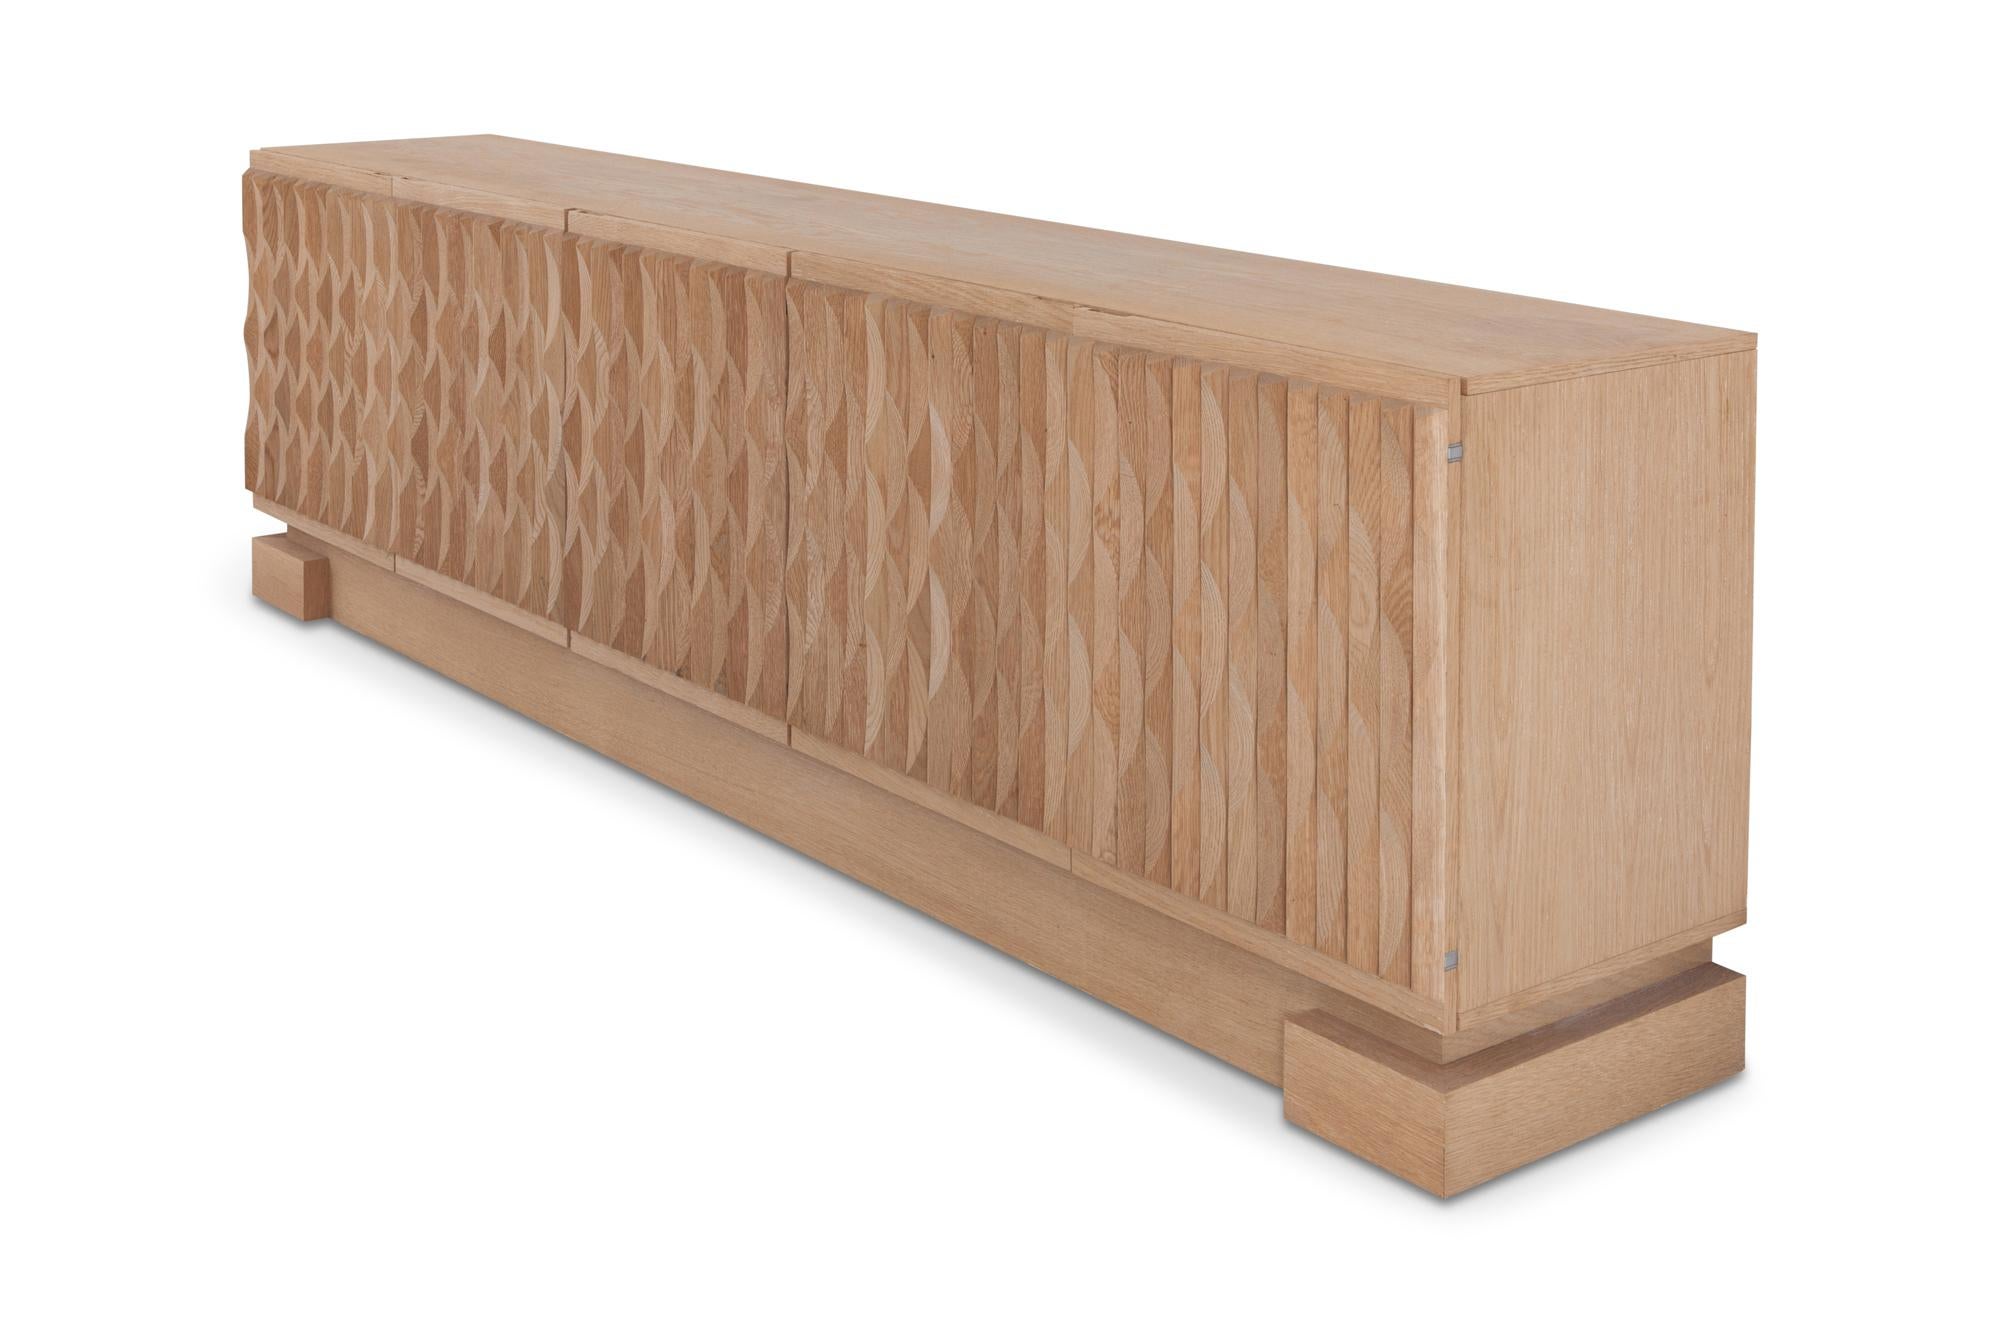 Late 20th Century De Coene Brutalist Sideboard with Graphic Patterns in Oak, 1970s